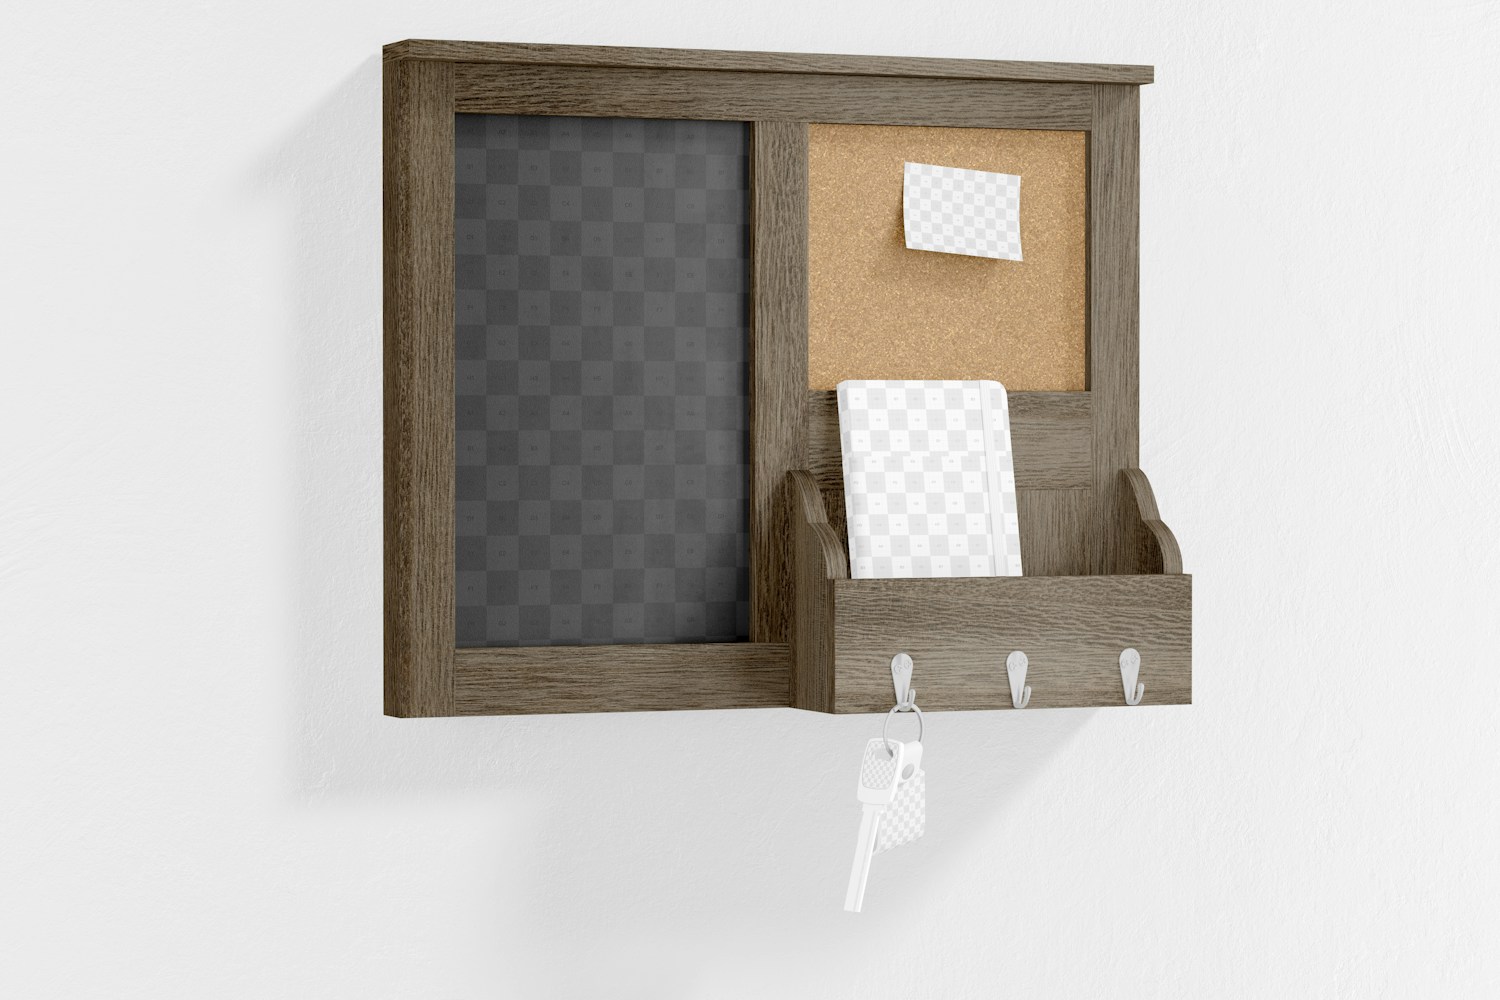 Mail Holder with Chalkboard Mockup, on Wall